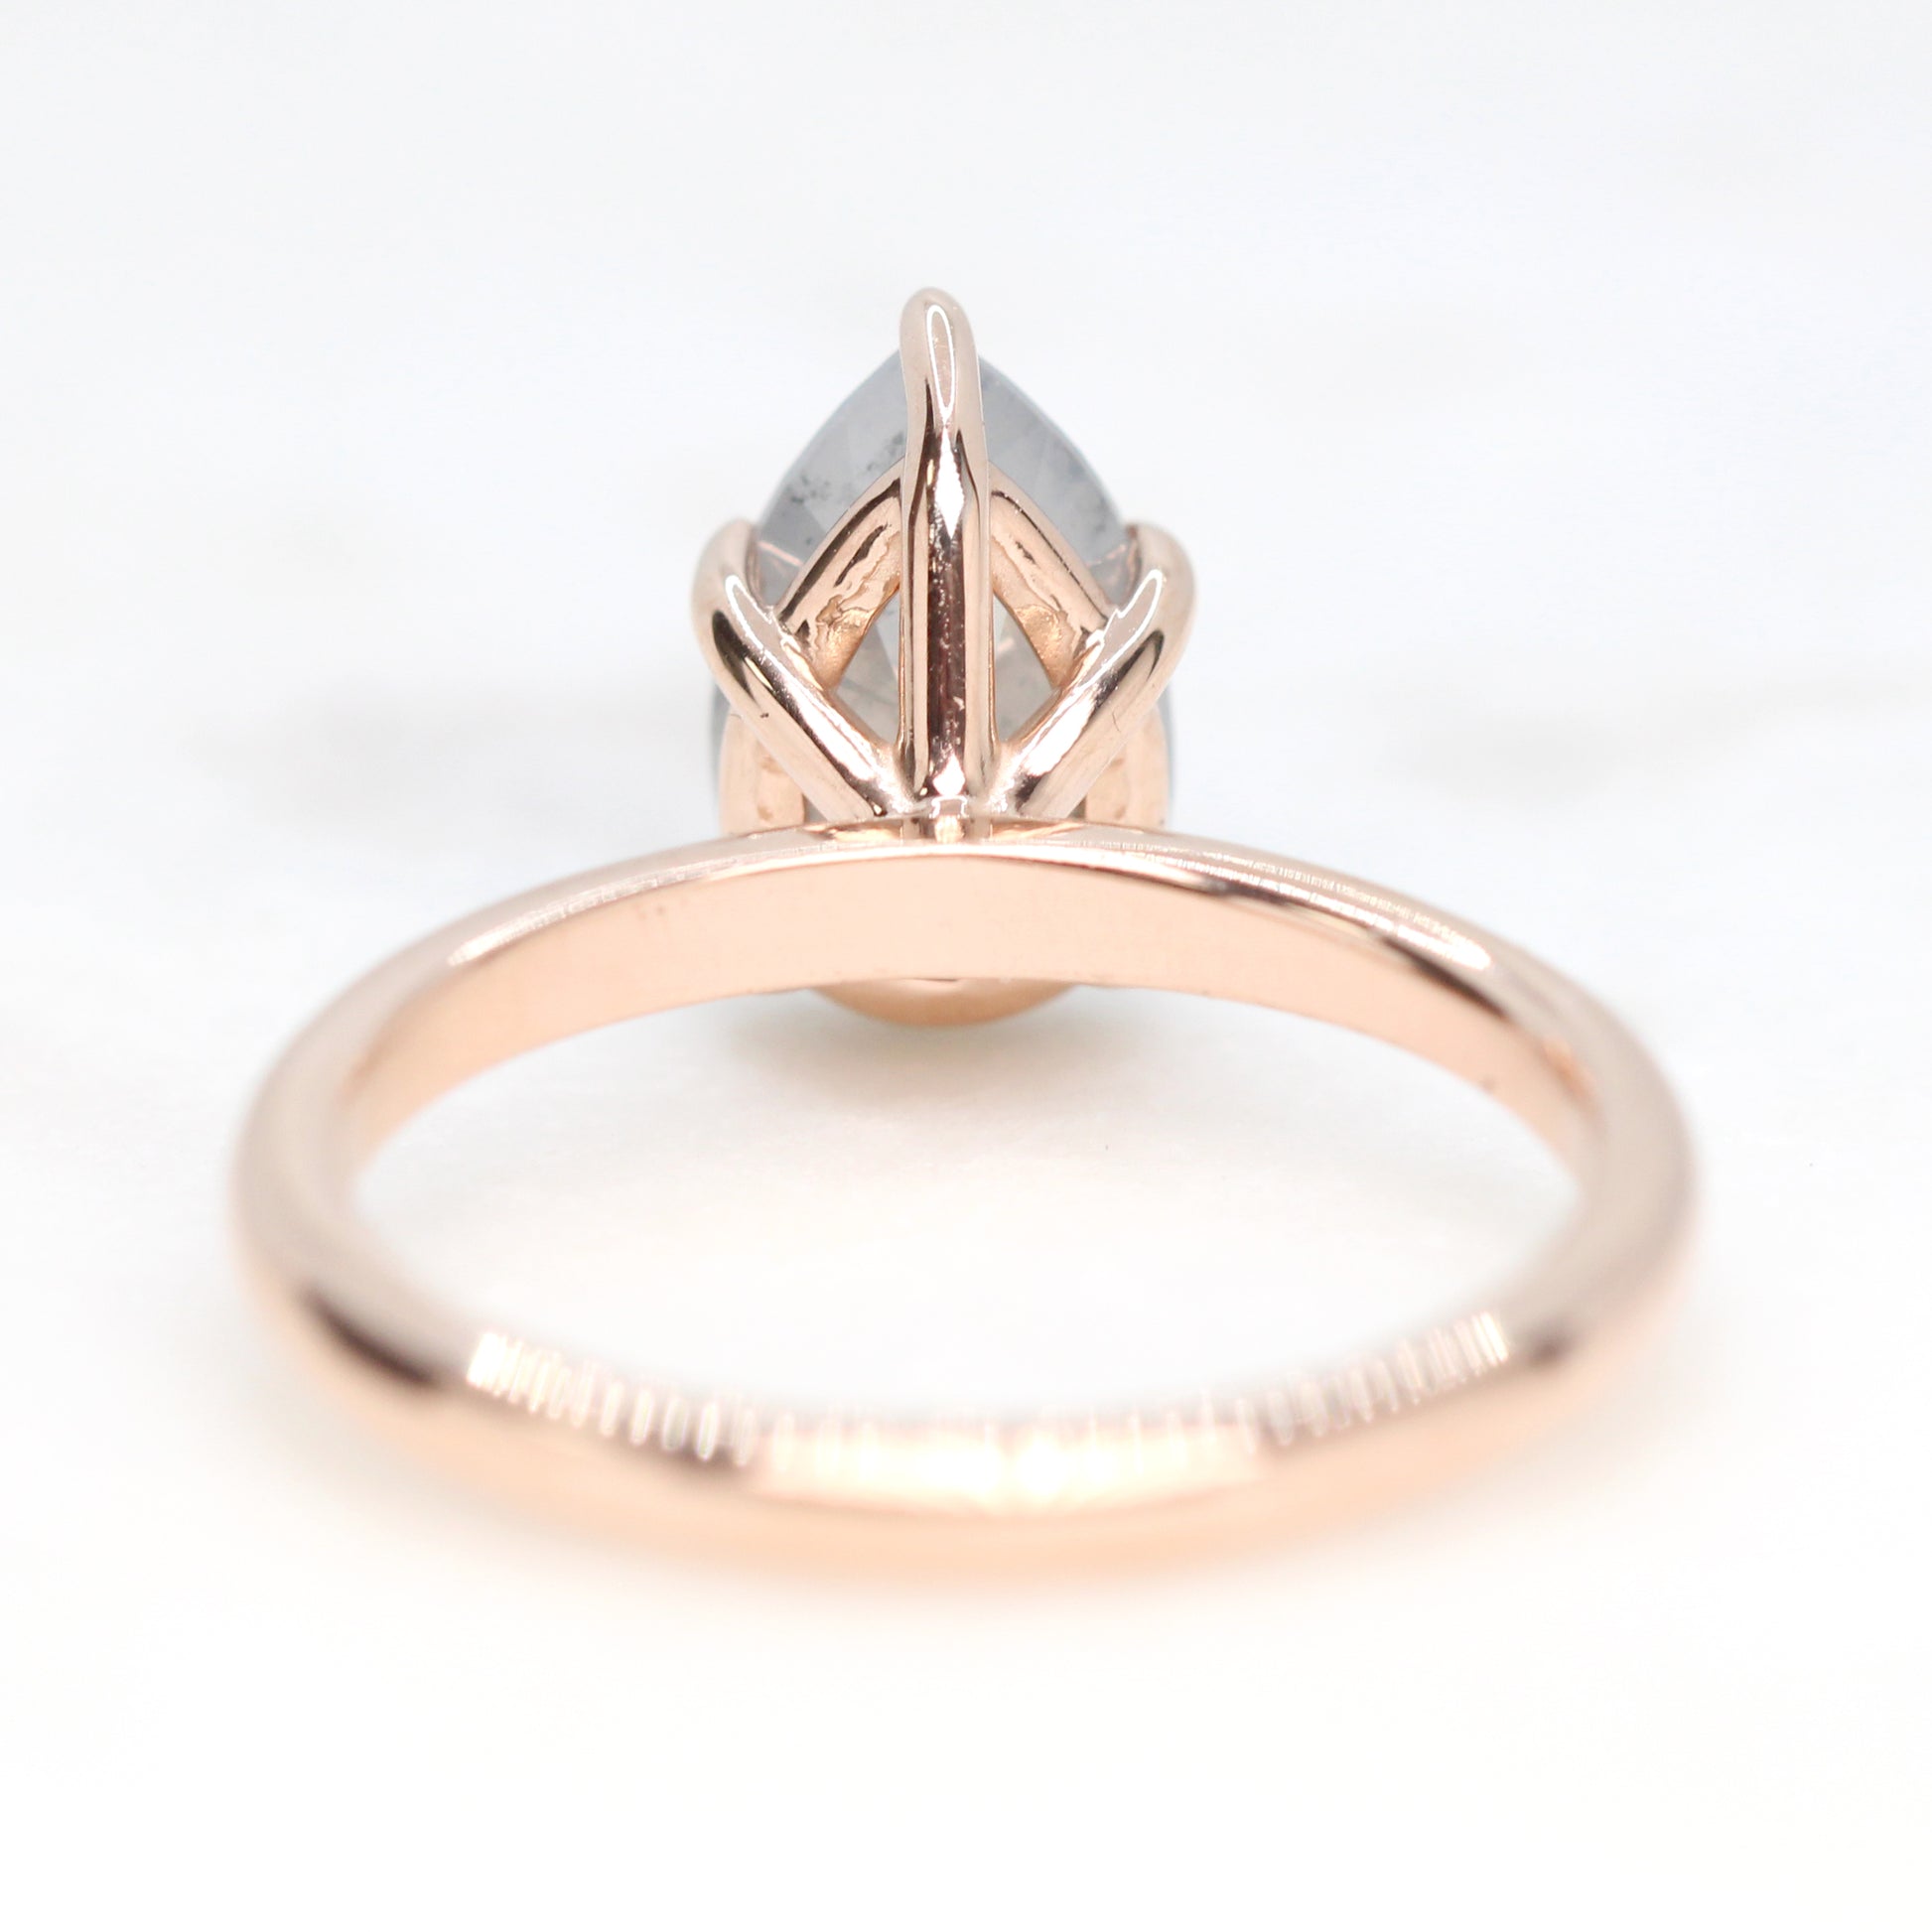 Charlotte Ring with a 2.31 Carat Pear Misty Gray Salt and Pepper Diamond in 14k Rose Gold - Ready to Size and Ship - Midwinter Co. Alternative Bridal Rings and Modern Fine Jewelry